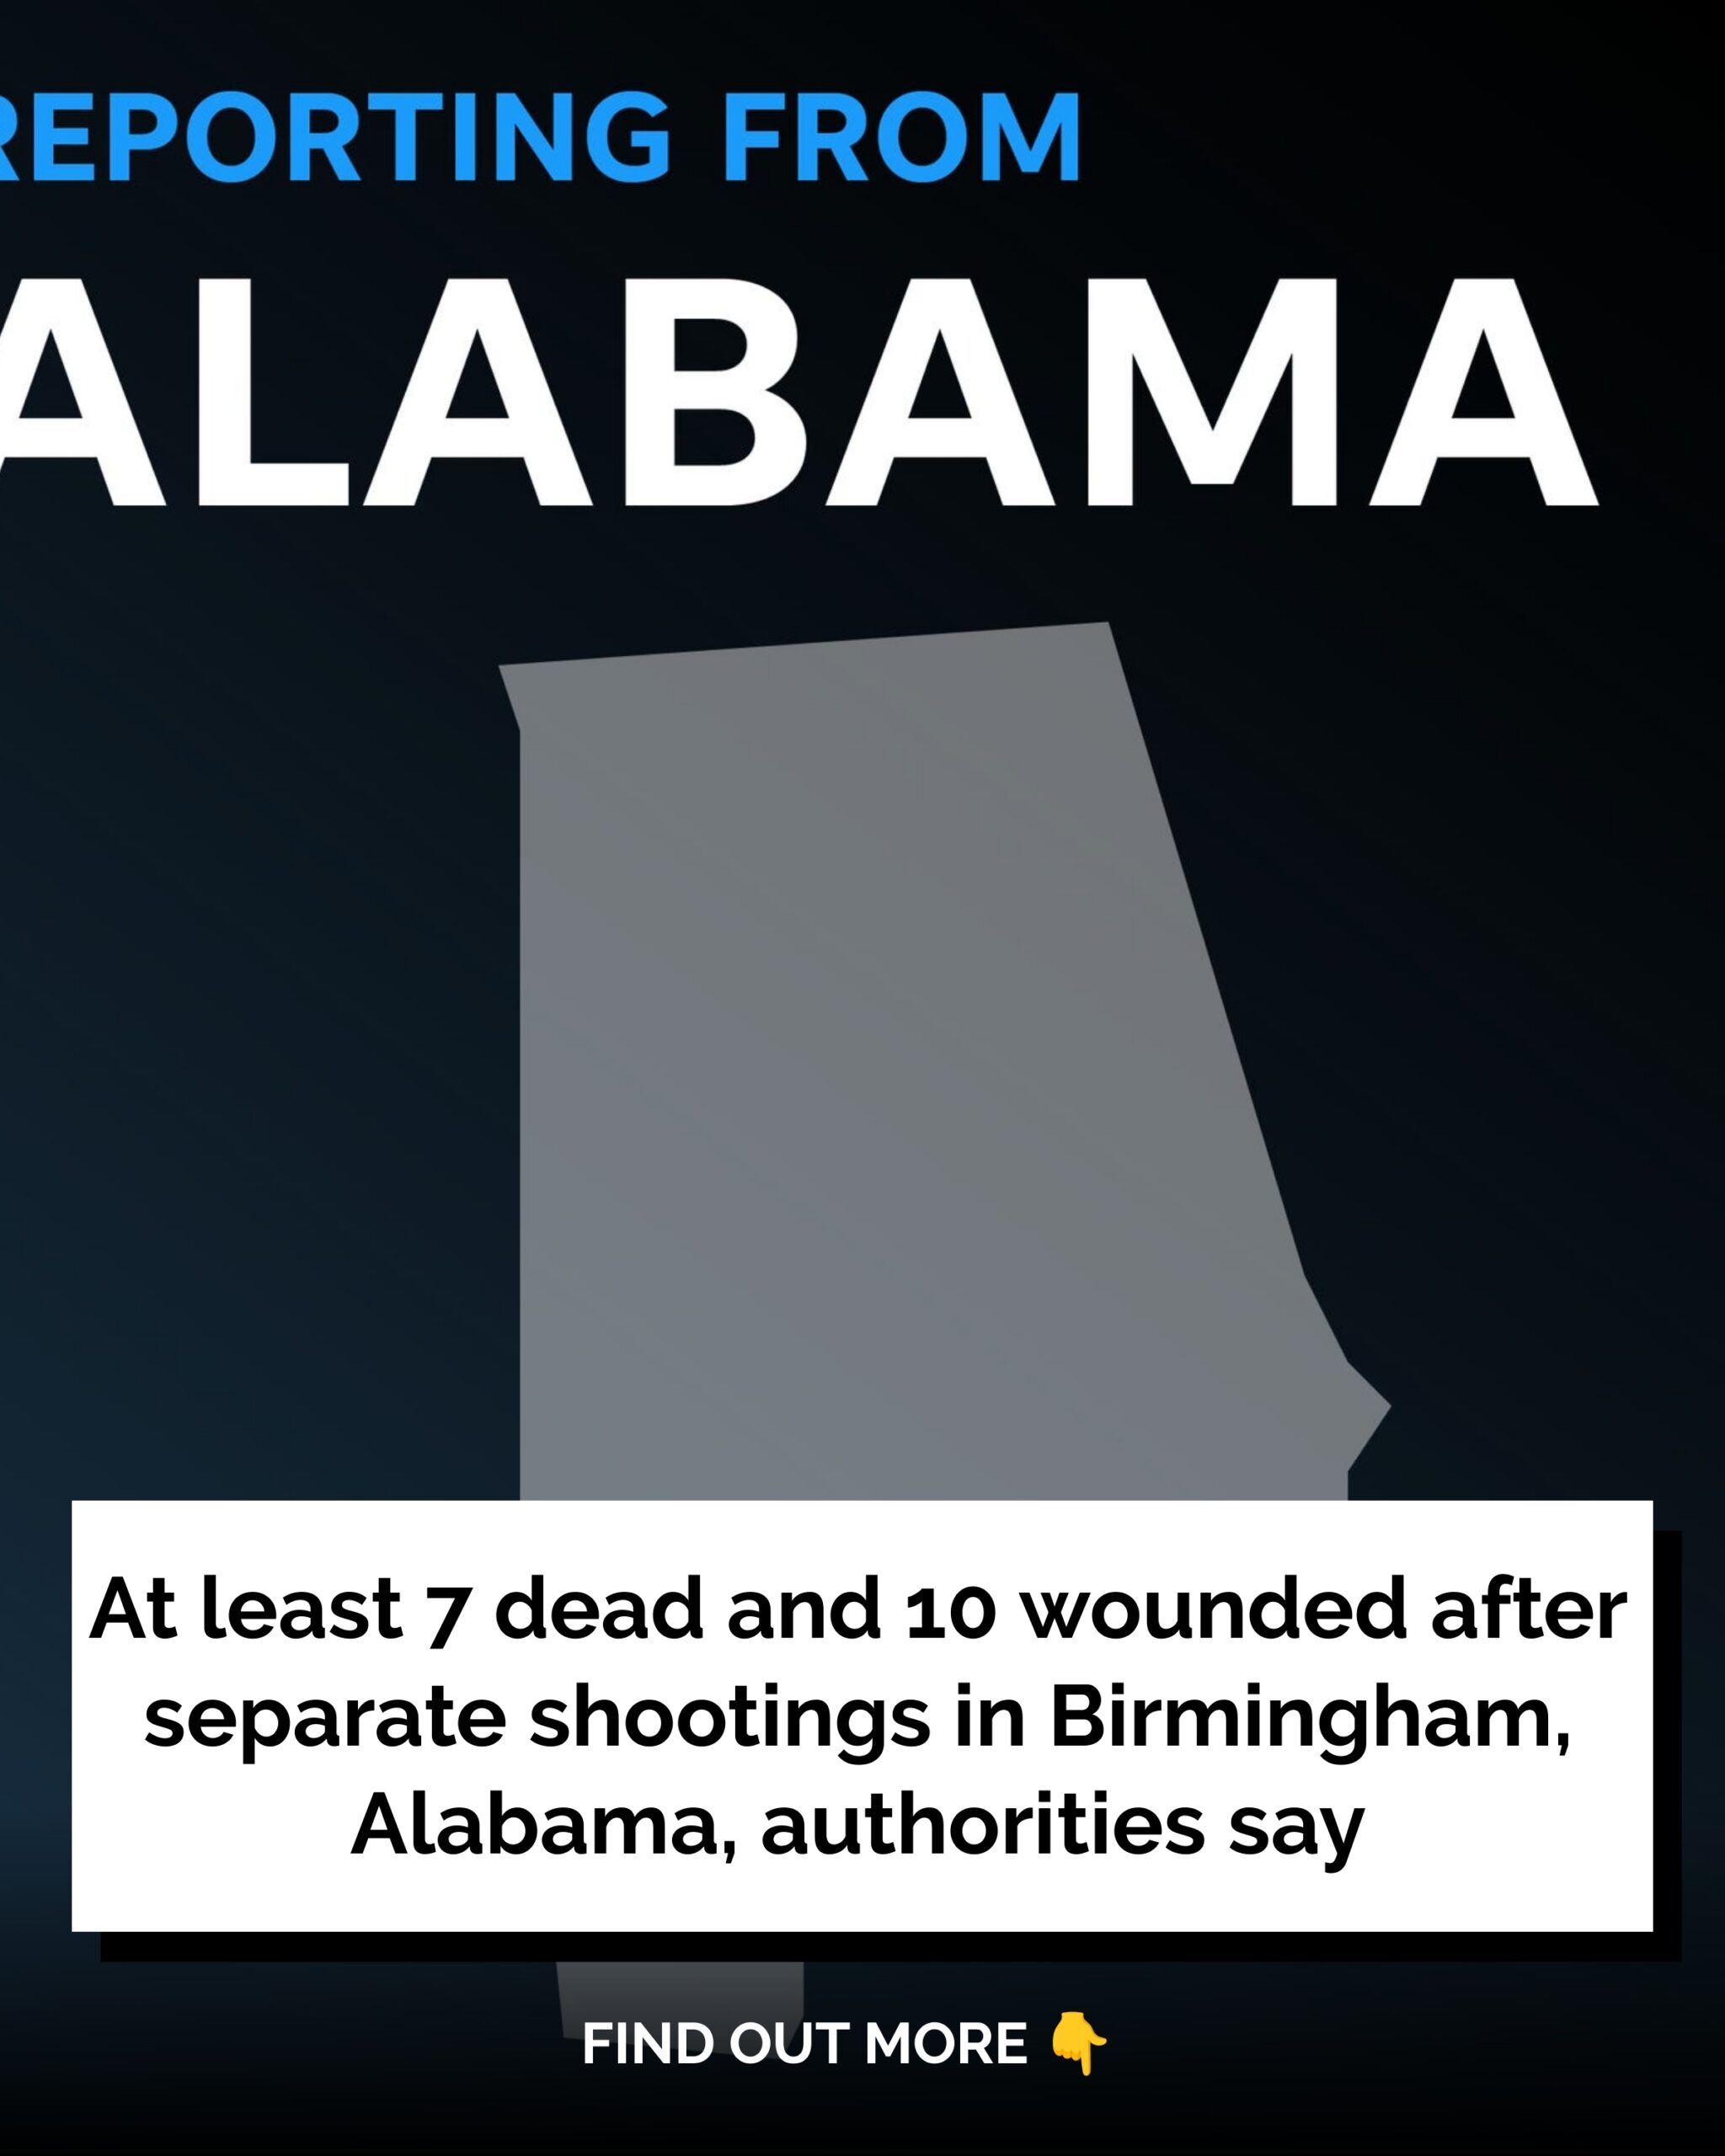 At least 7 dead after separate shootings in Birmingham, Alabama, authorities say